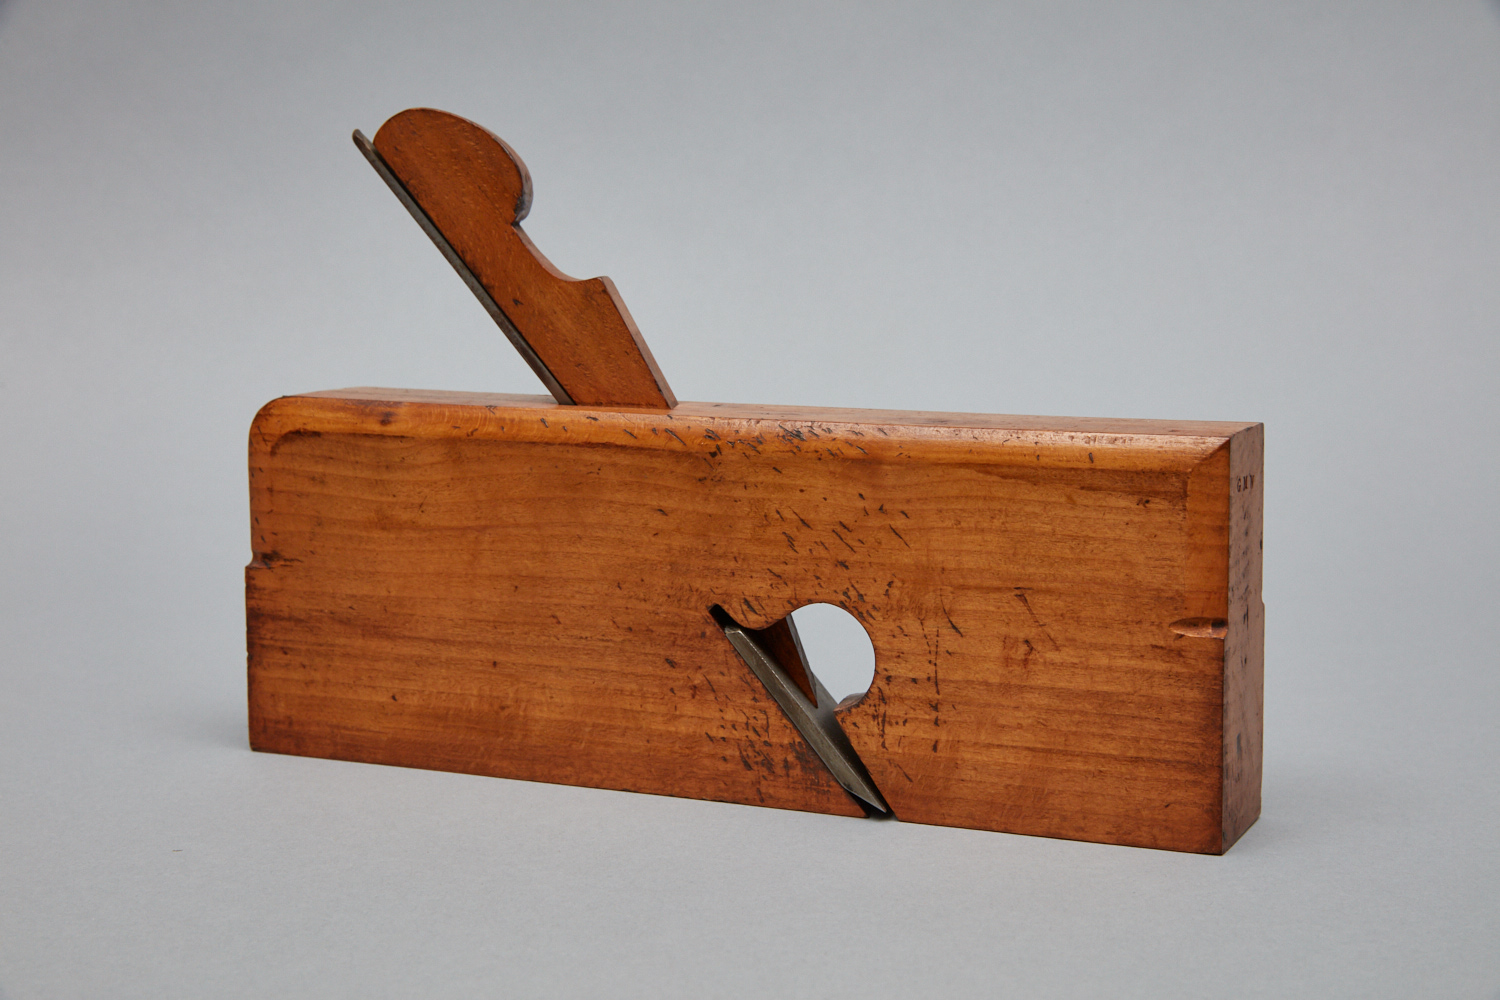 A wooden box with a knife in it.